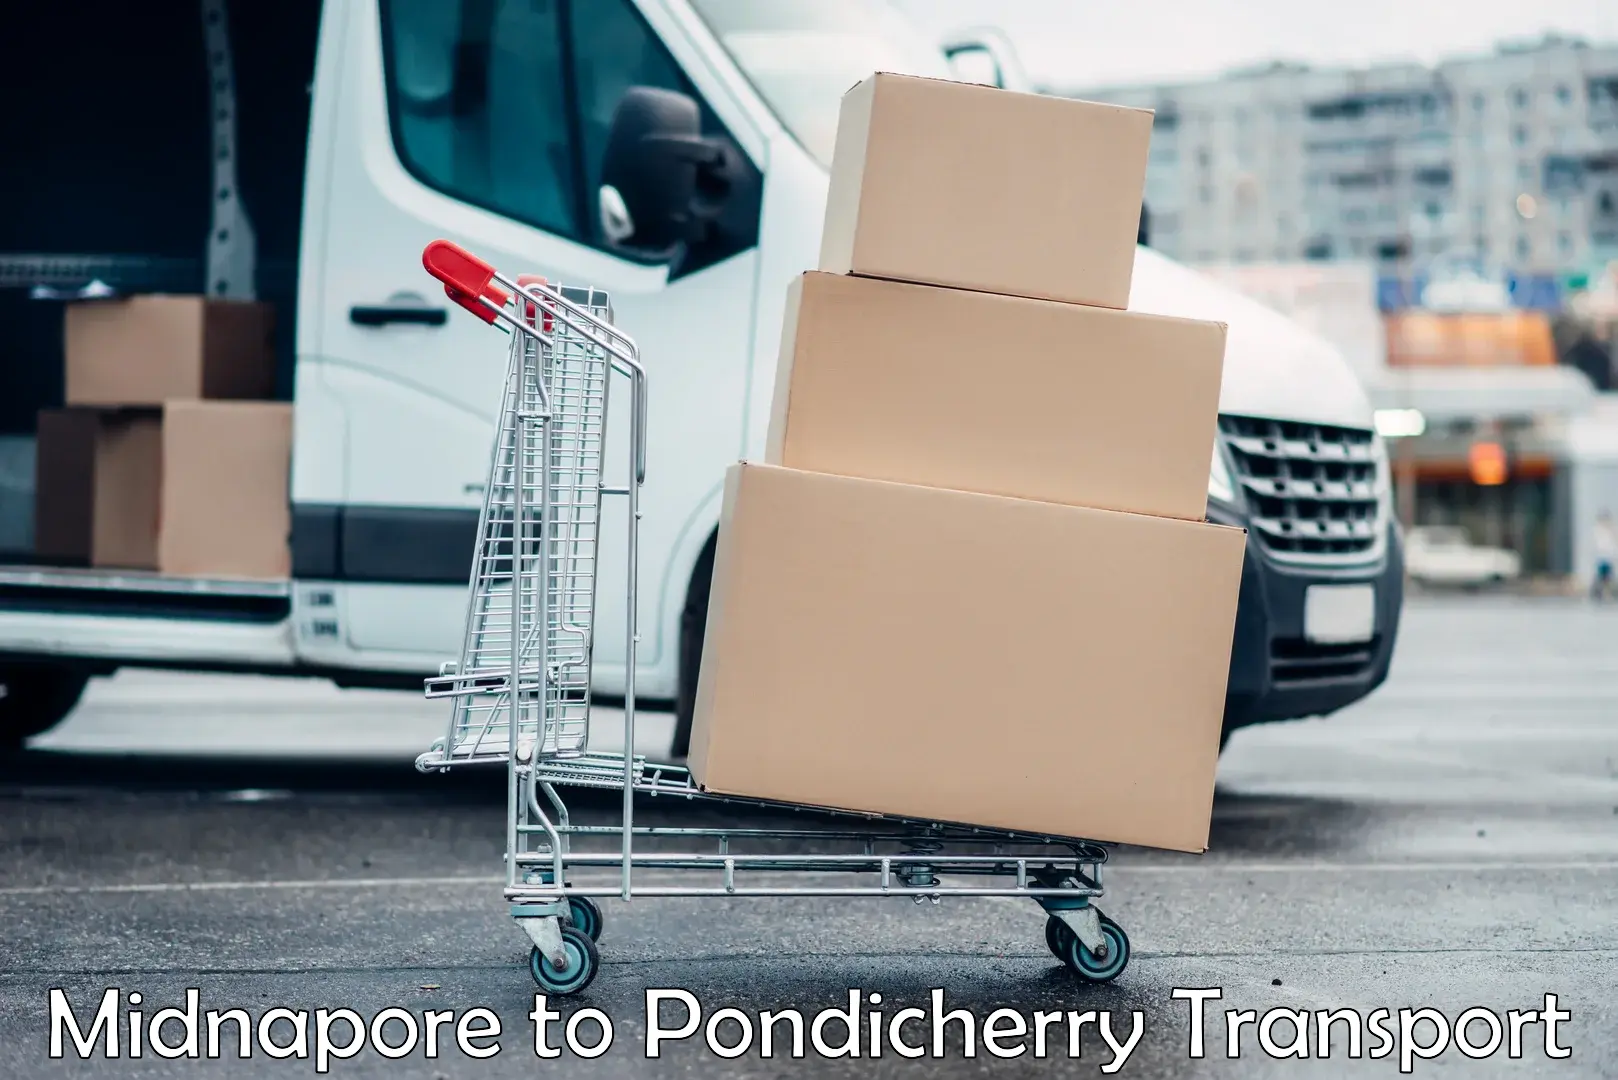 Logistics transportation services in Midnapore to Pondicherry